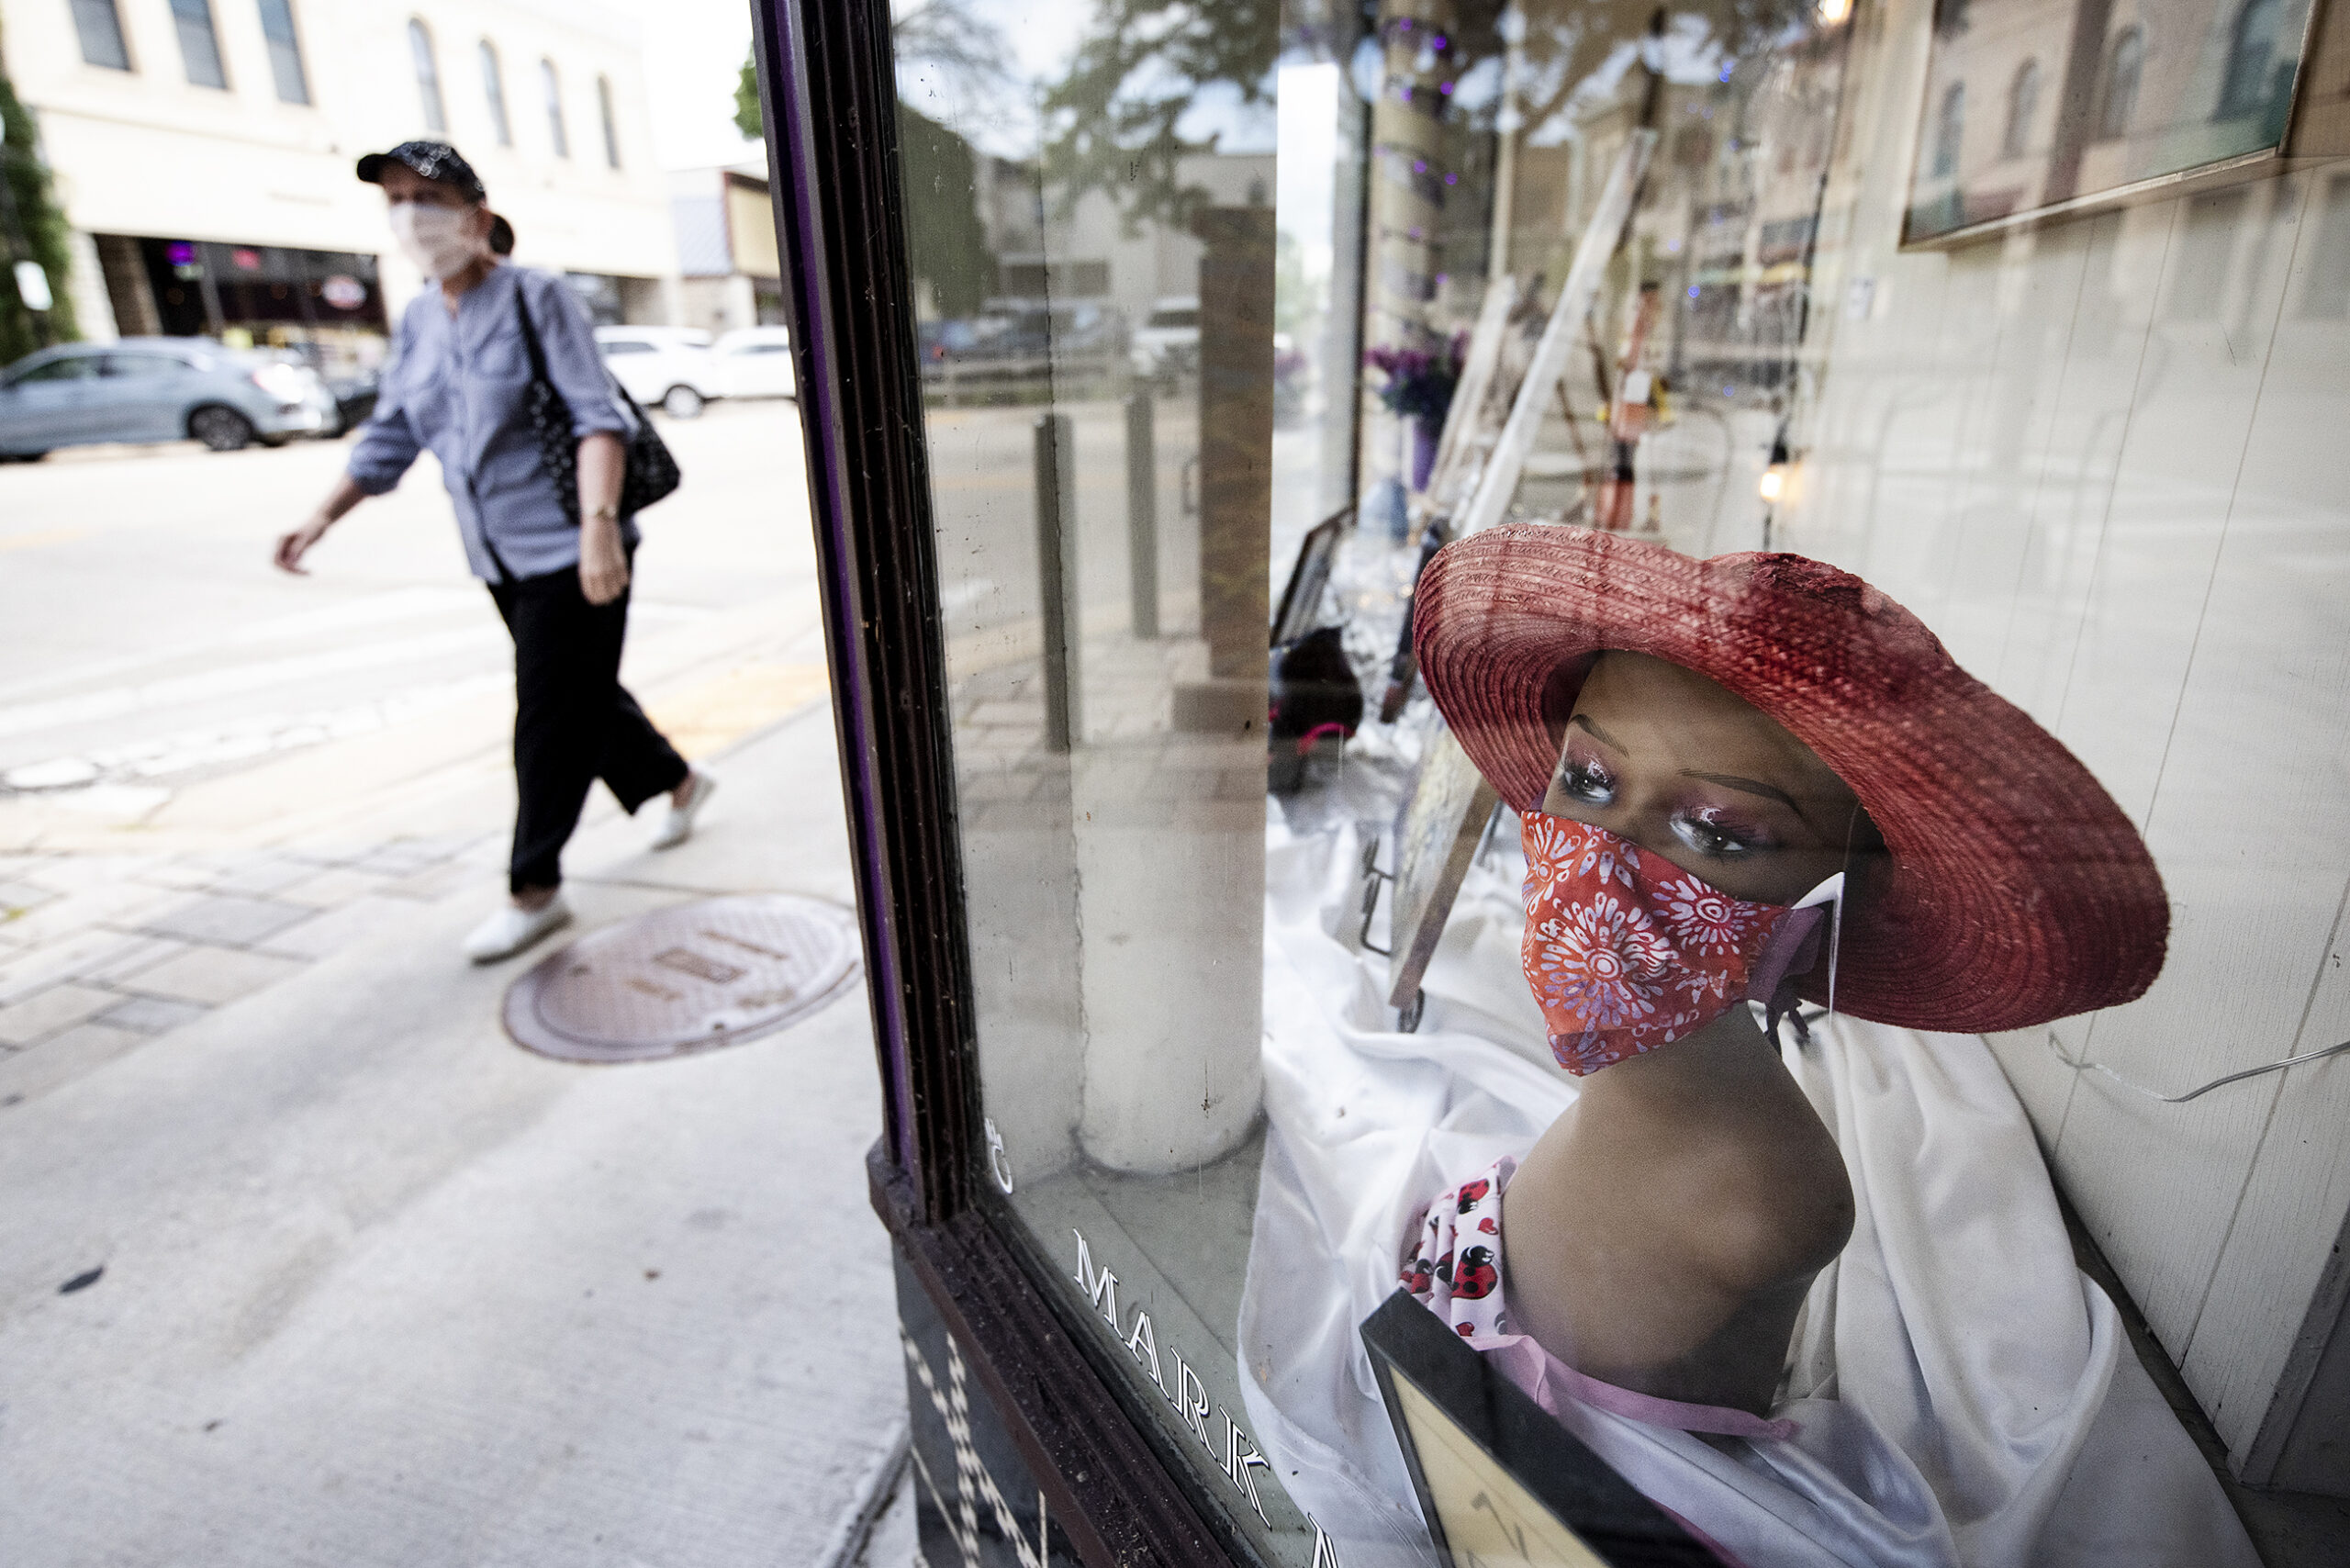 a mannequin bust is used to display a red cloth face mask in a window display as a pedestrian in a mask passes by